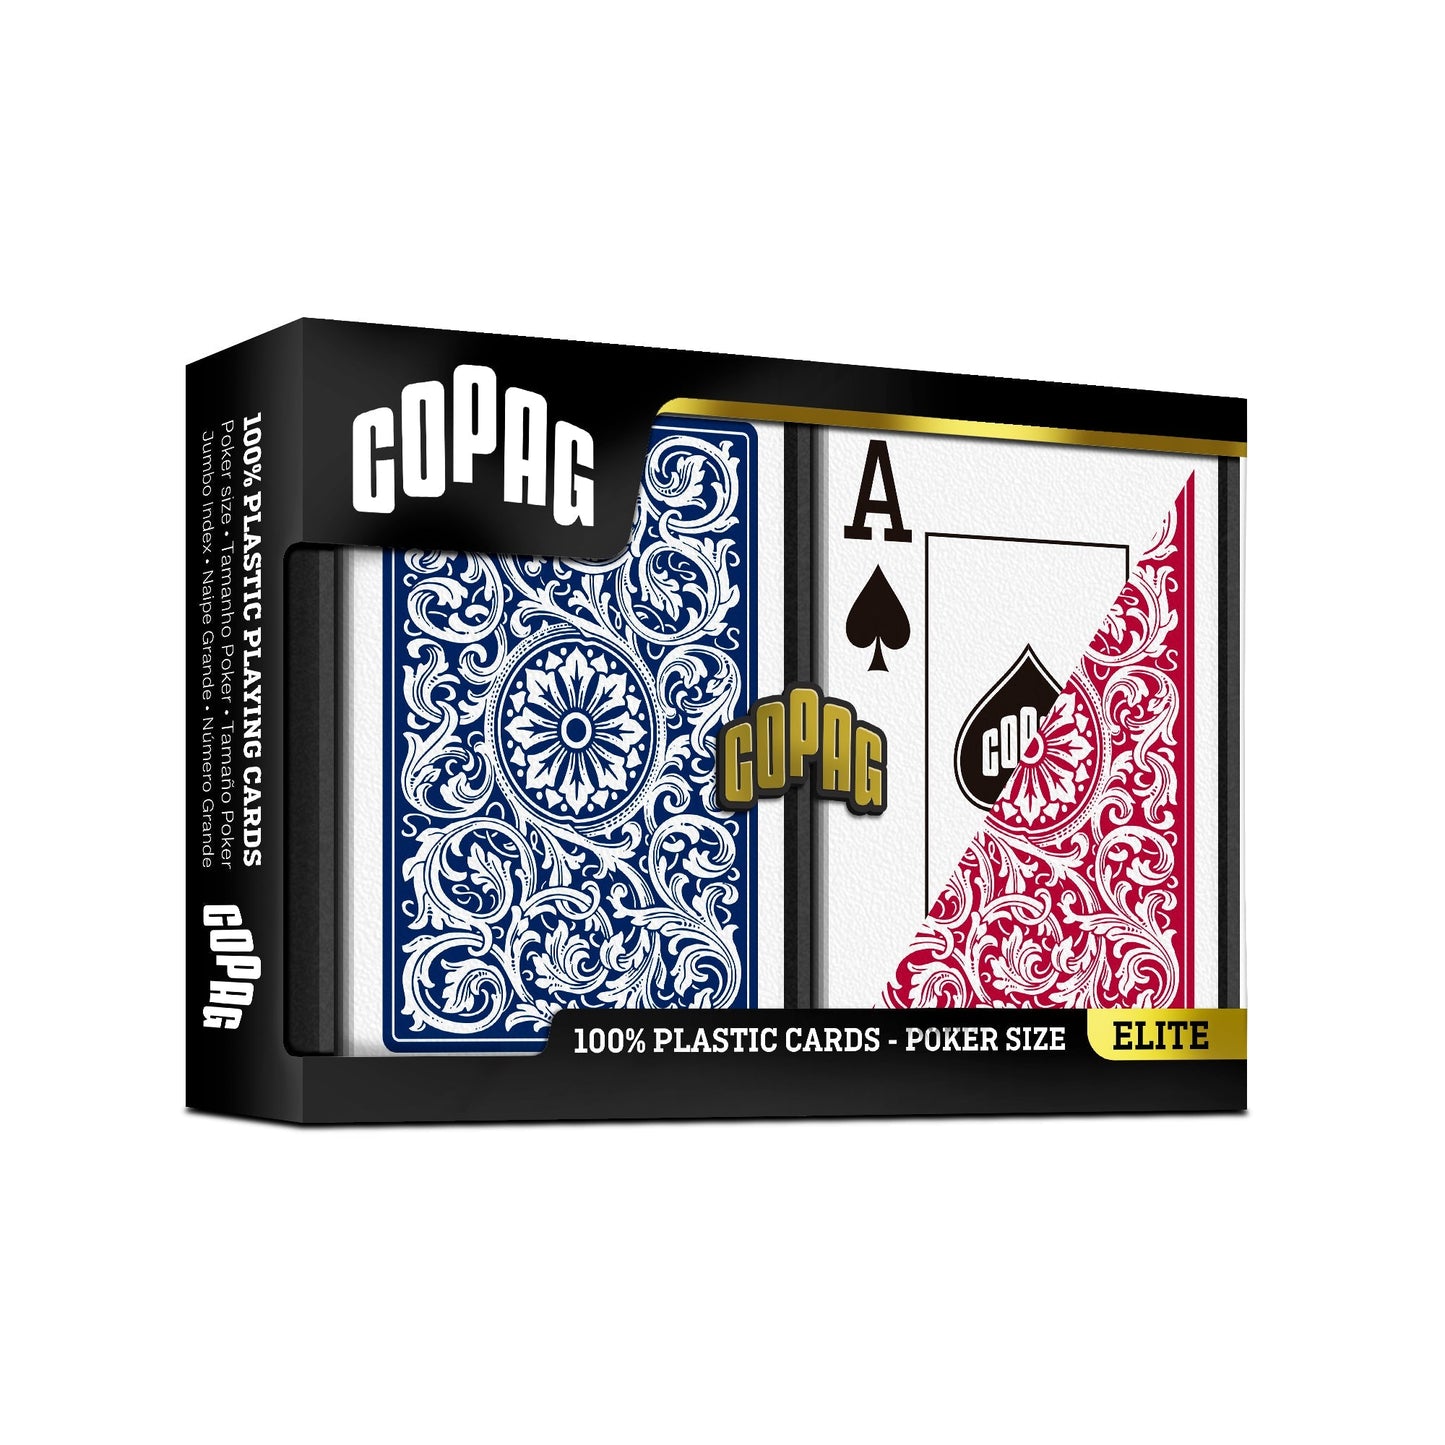 Barcode marked cards - Martin Kabrhel's poker cheat choice,  Copag poker size jumbo, PPPoker cheating devices